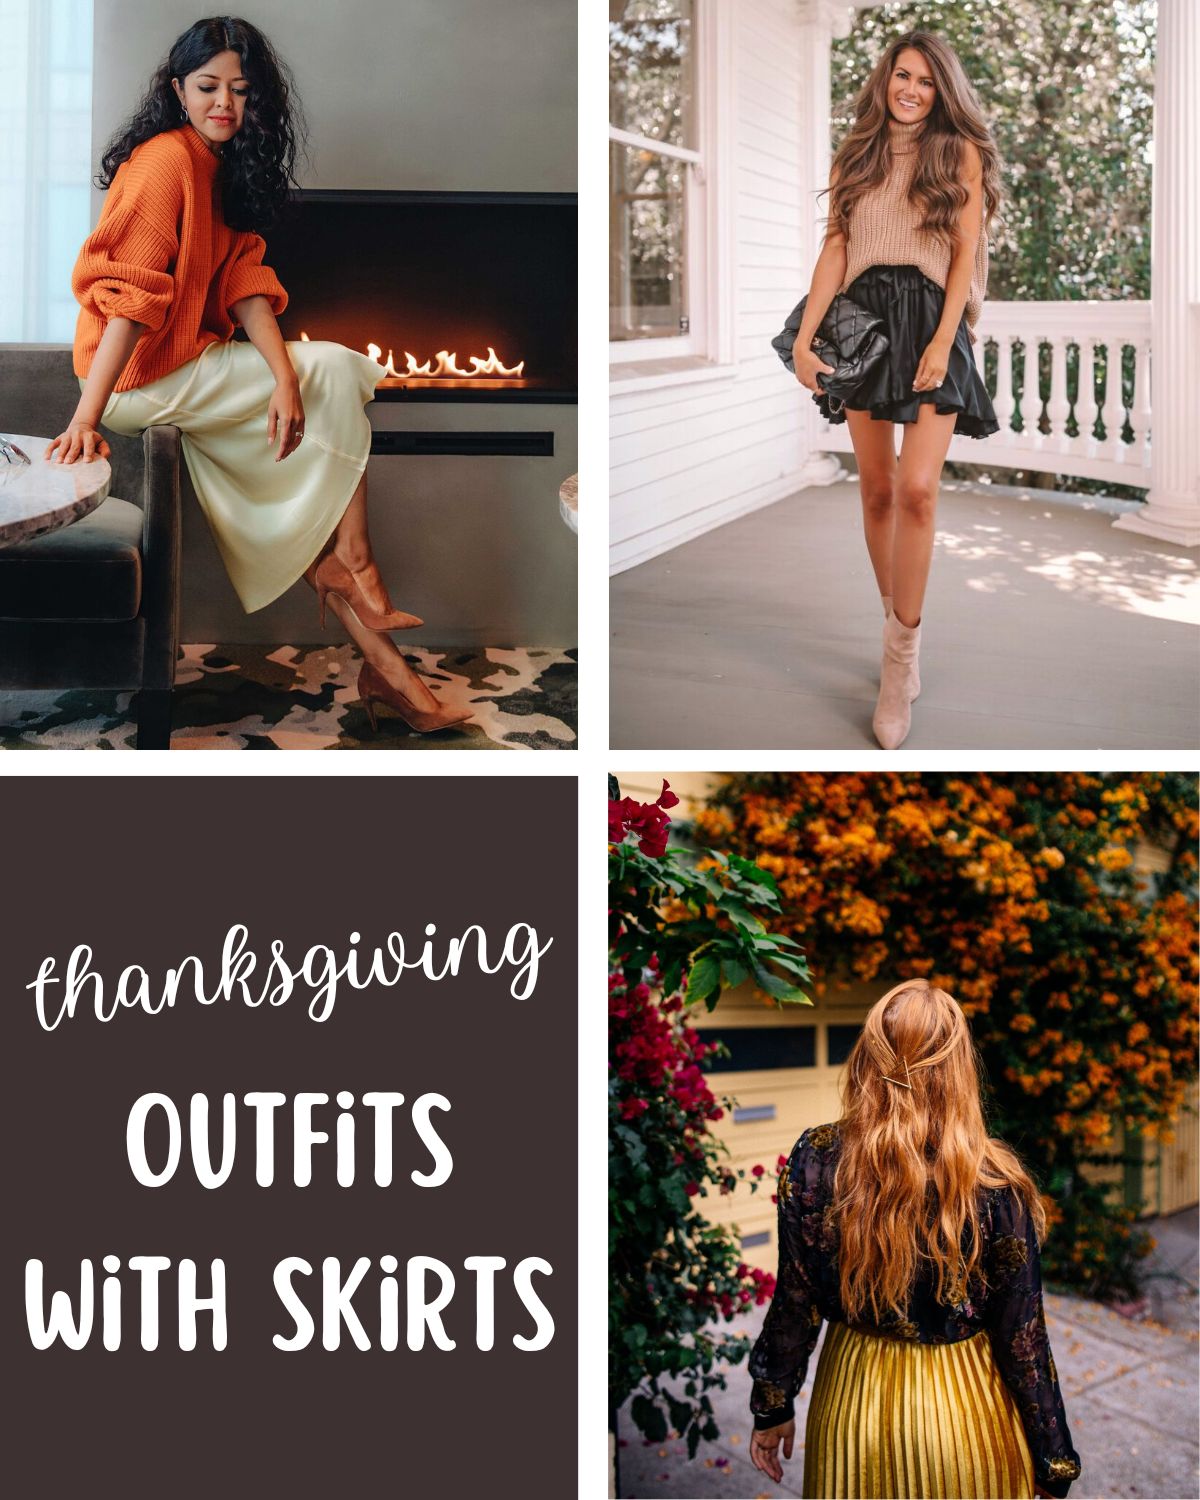 Fall outfits with skirts, three women in skirts and sweaters